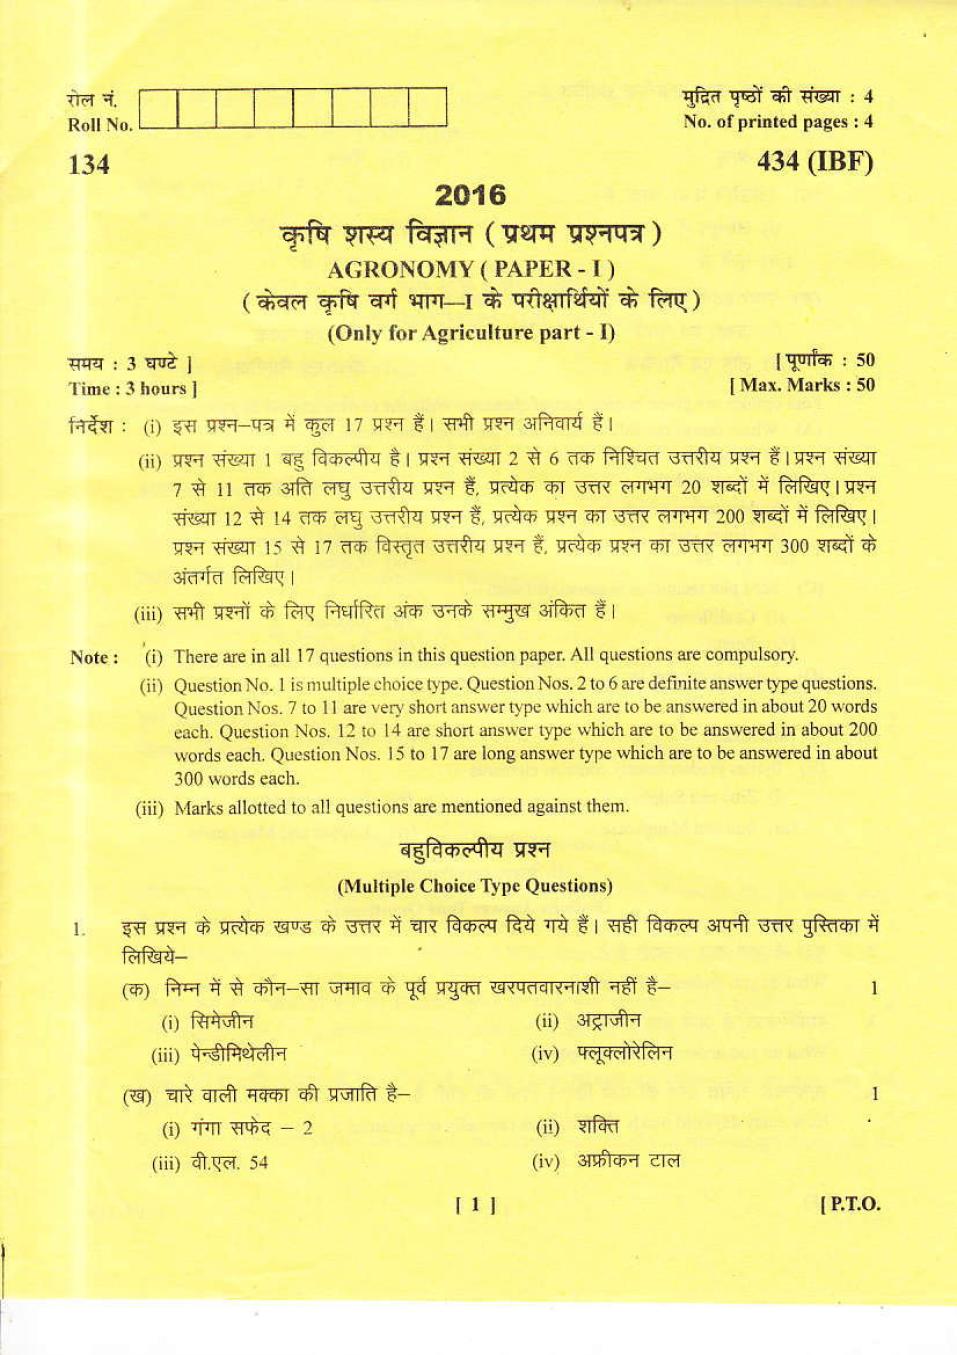 Uttarakhand Board Class 12 Question Paper 2016 for Agronomy - Page 1